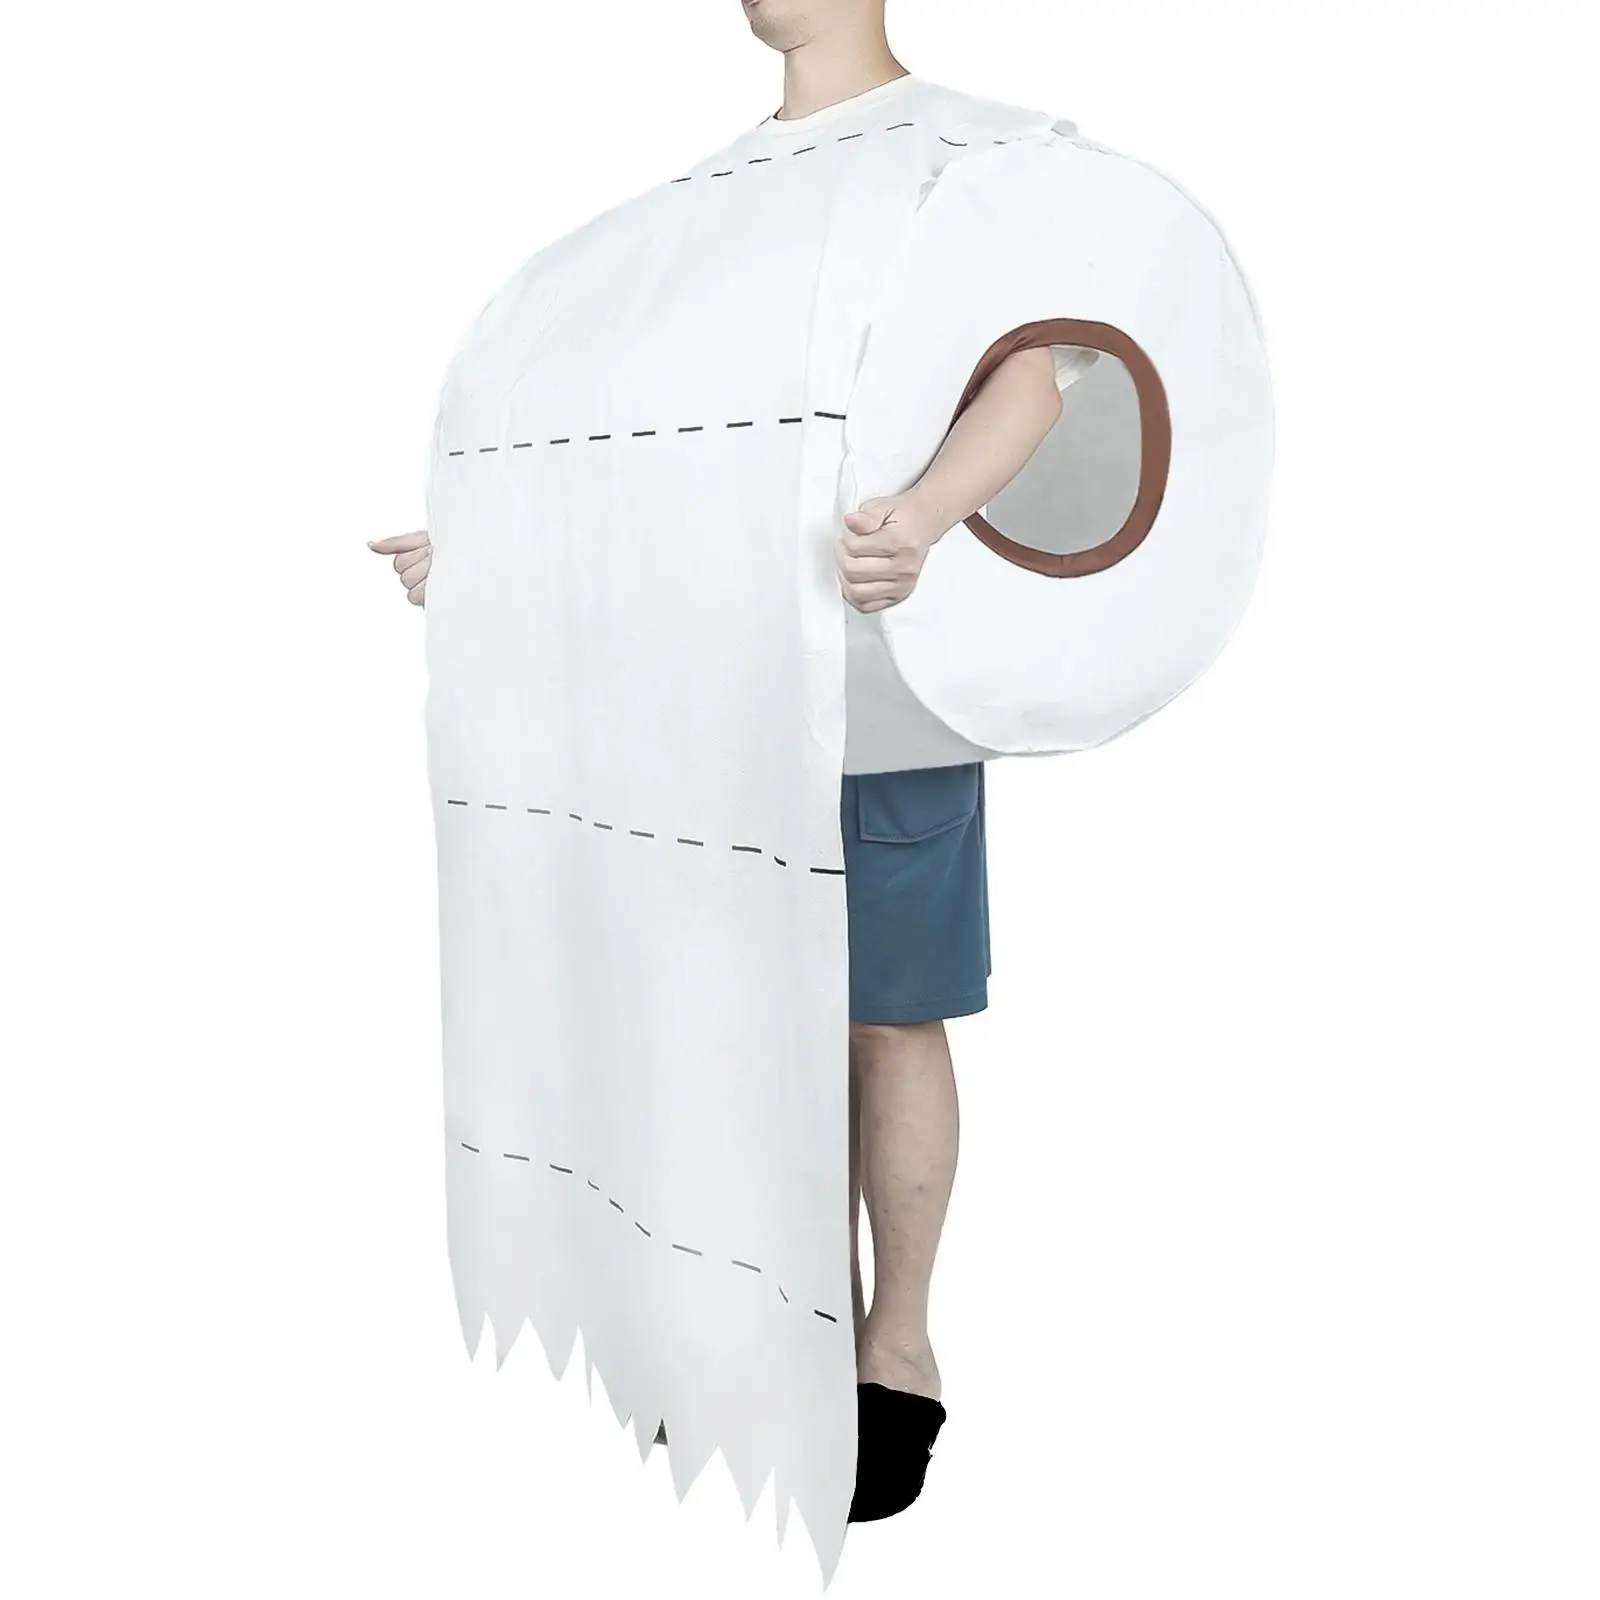 Toilet Tissue Costume Hilarious Dress up Cosplay Costume Roll Paper Cosplay Clothing for Cosplay Halloween Party Couples Men